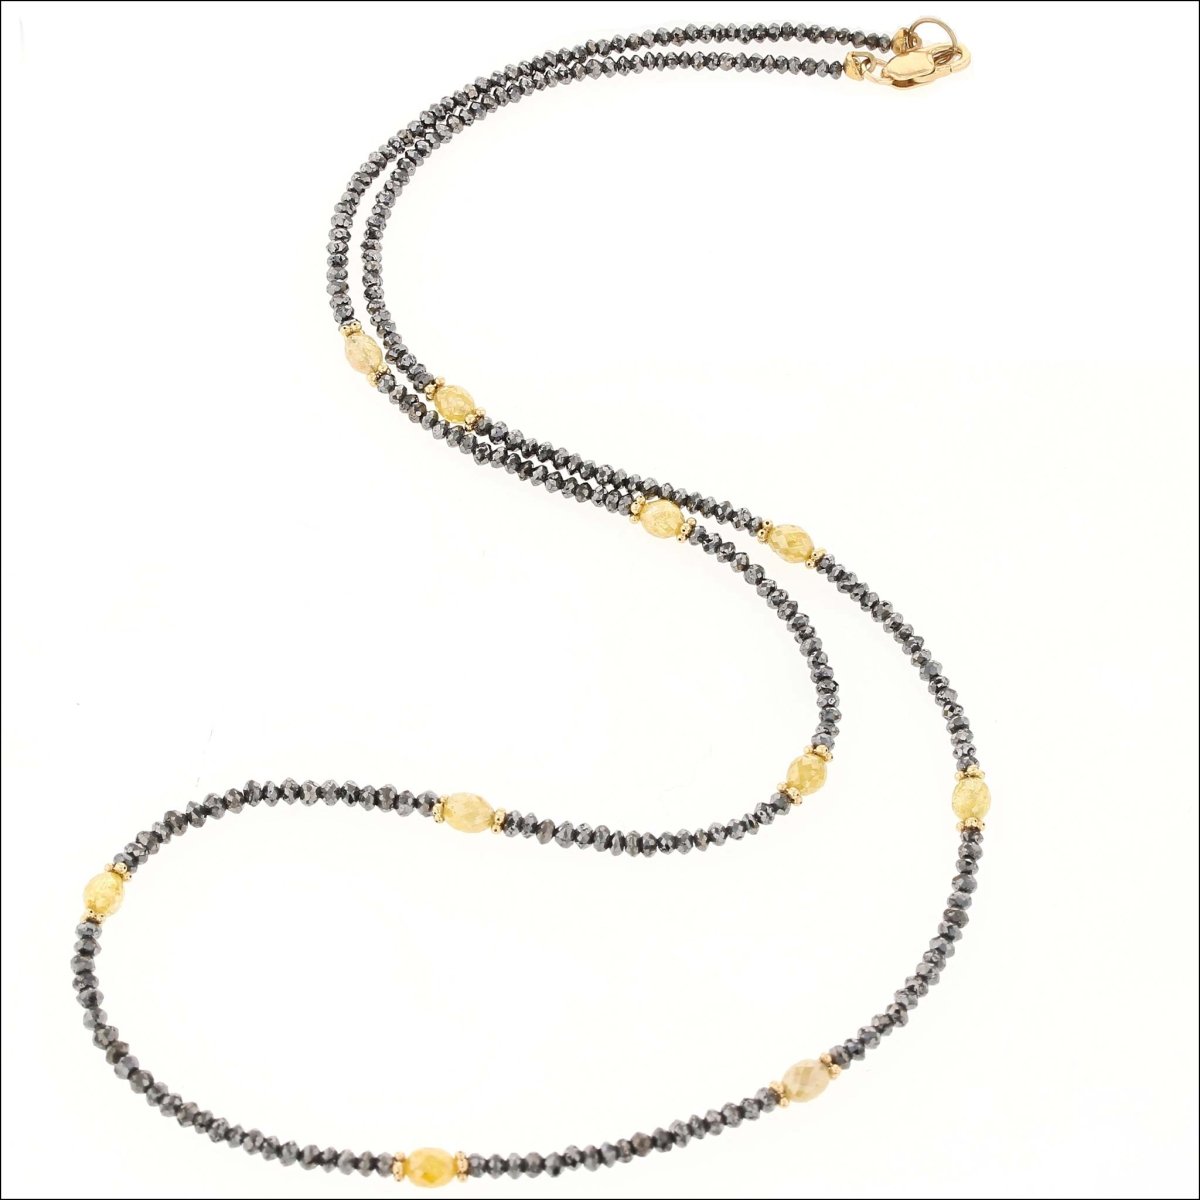 Black and Yellow Diamond Bead Strand Necklace 18" 14KY - JewelsmithNecklaces